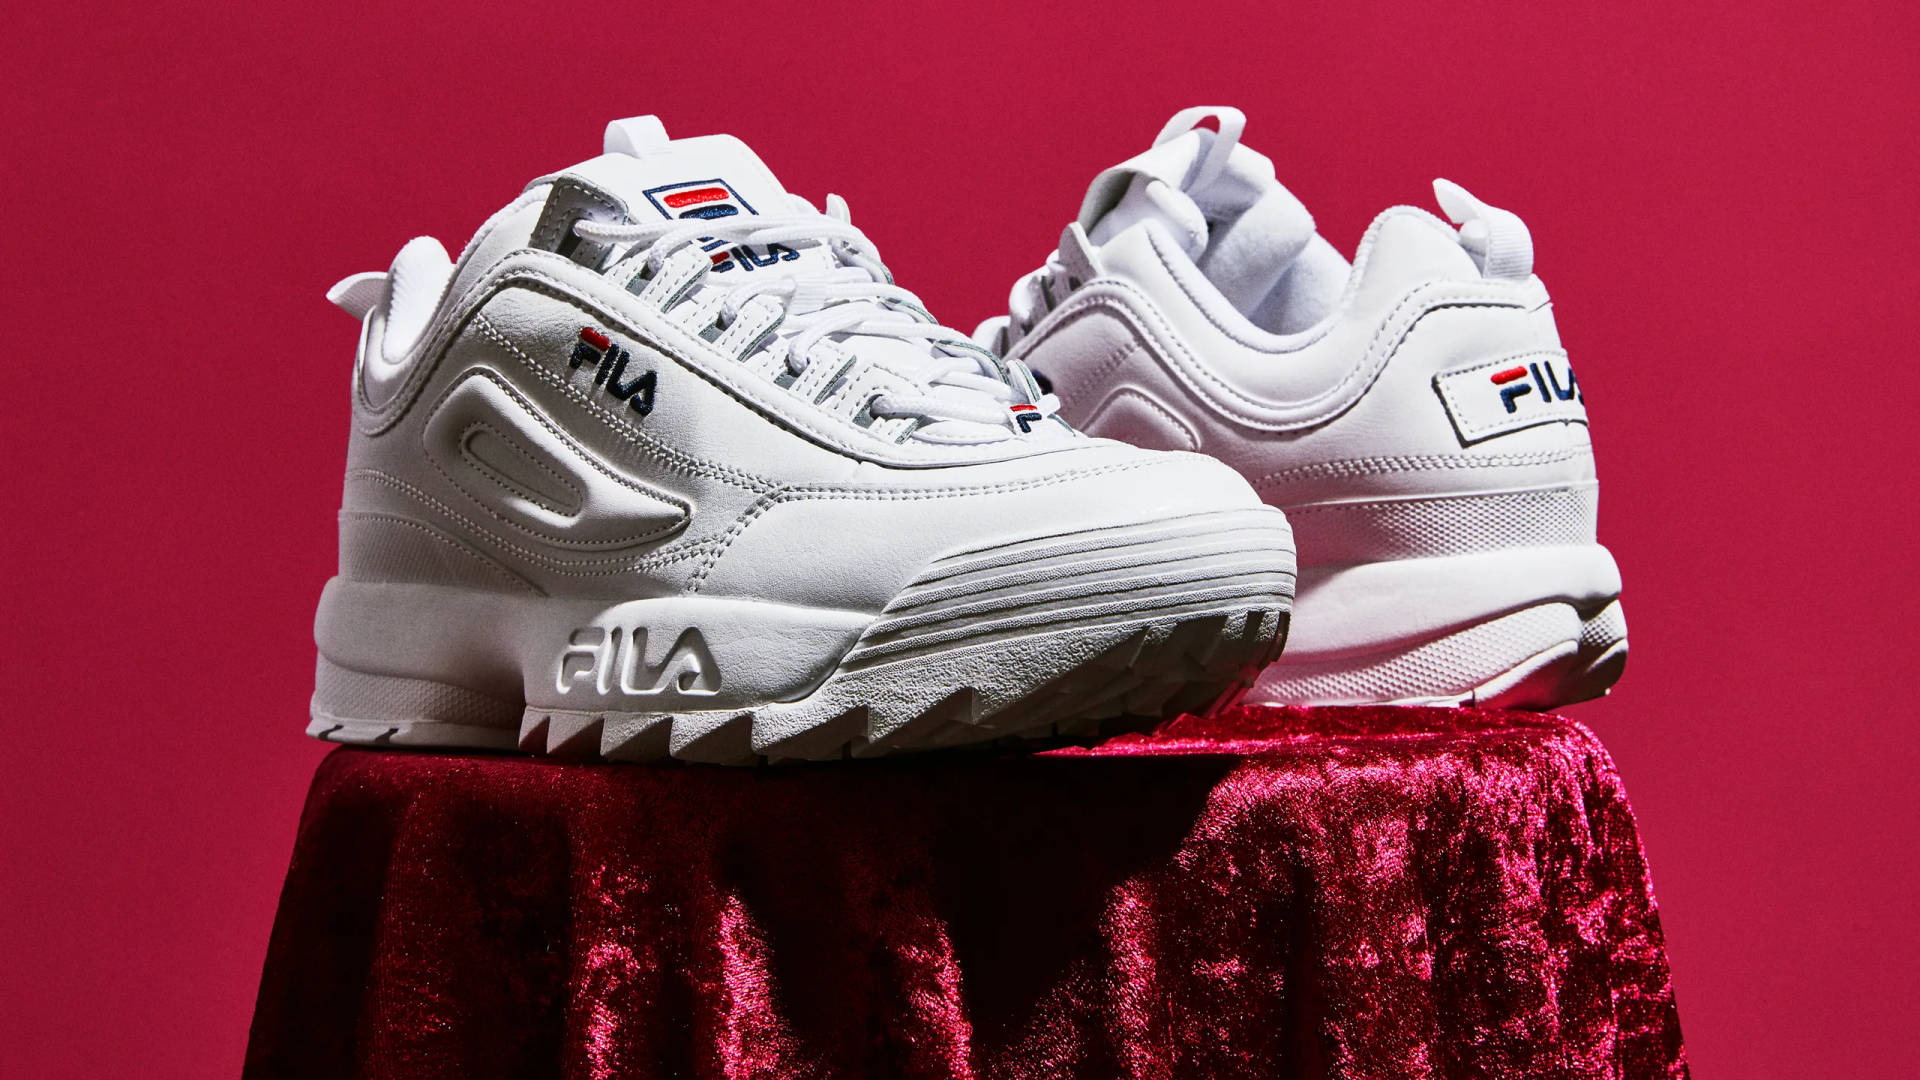 Fila White Sneakers - Style And Comfort In Every Step Wallpaper